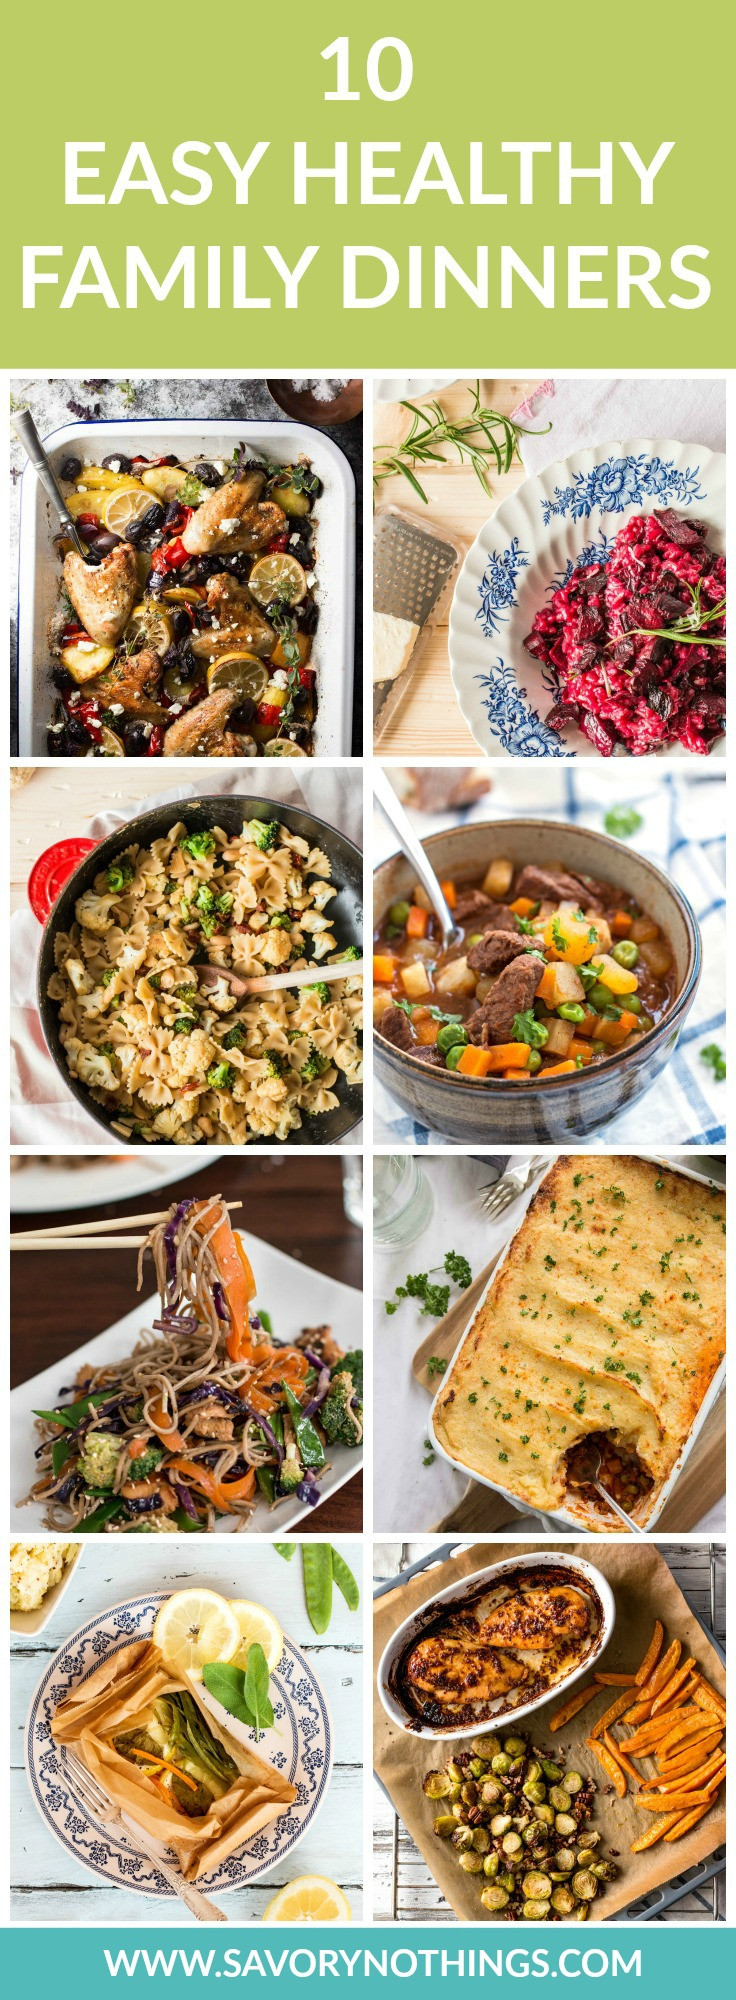 Healthy Dinners For Family
 10 Healthy Family Dinners Easy Recipes for Busy Weeknights